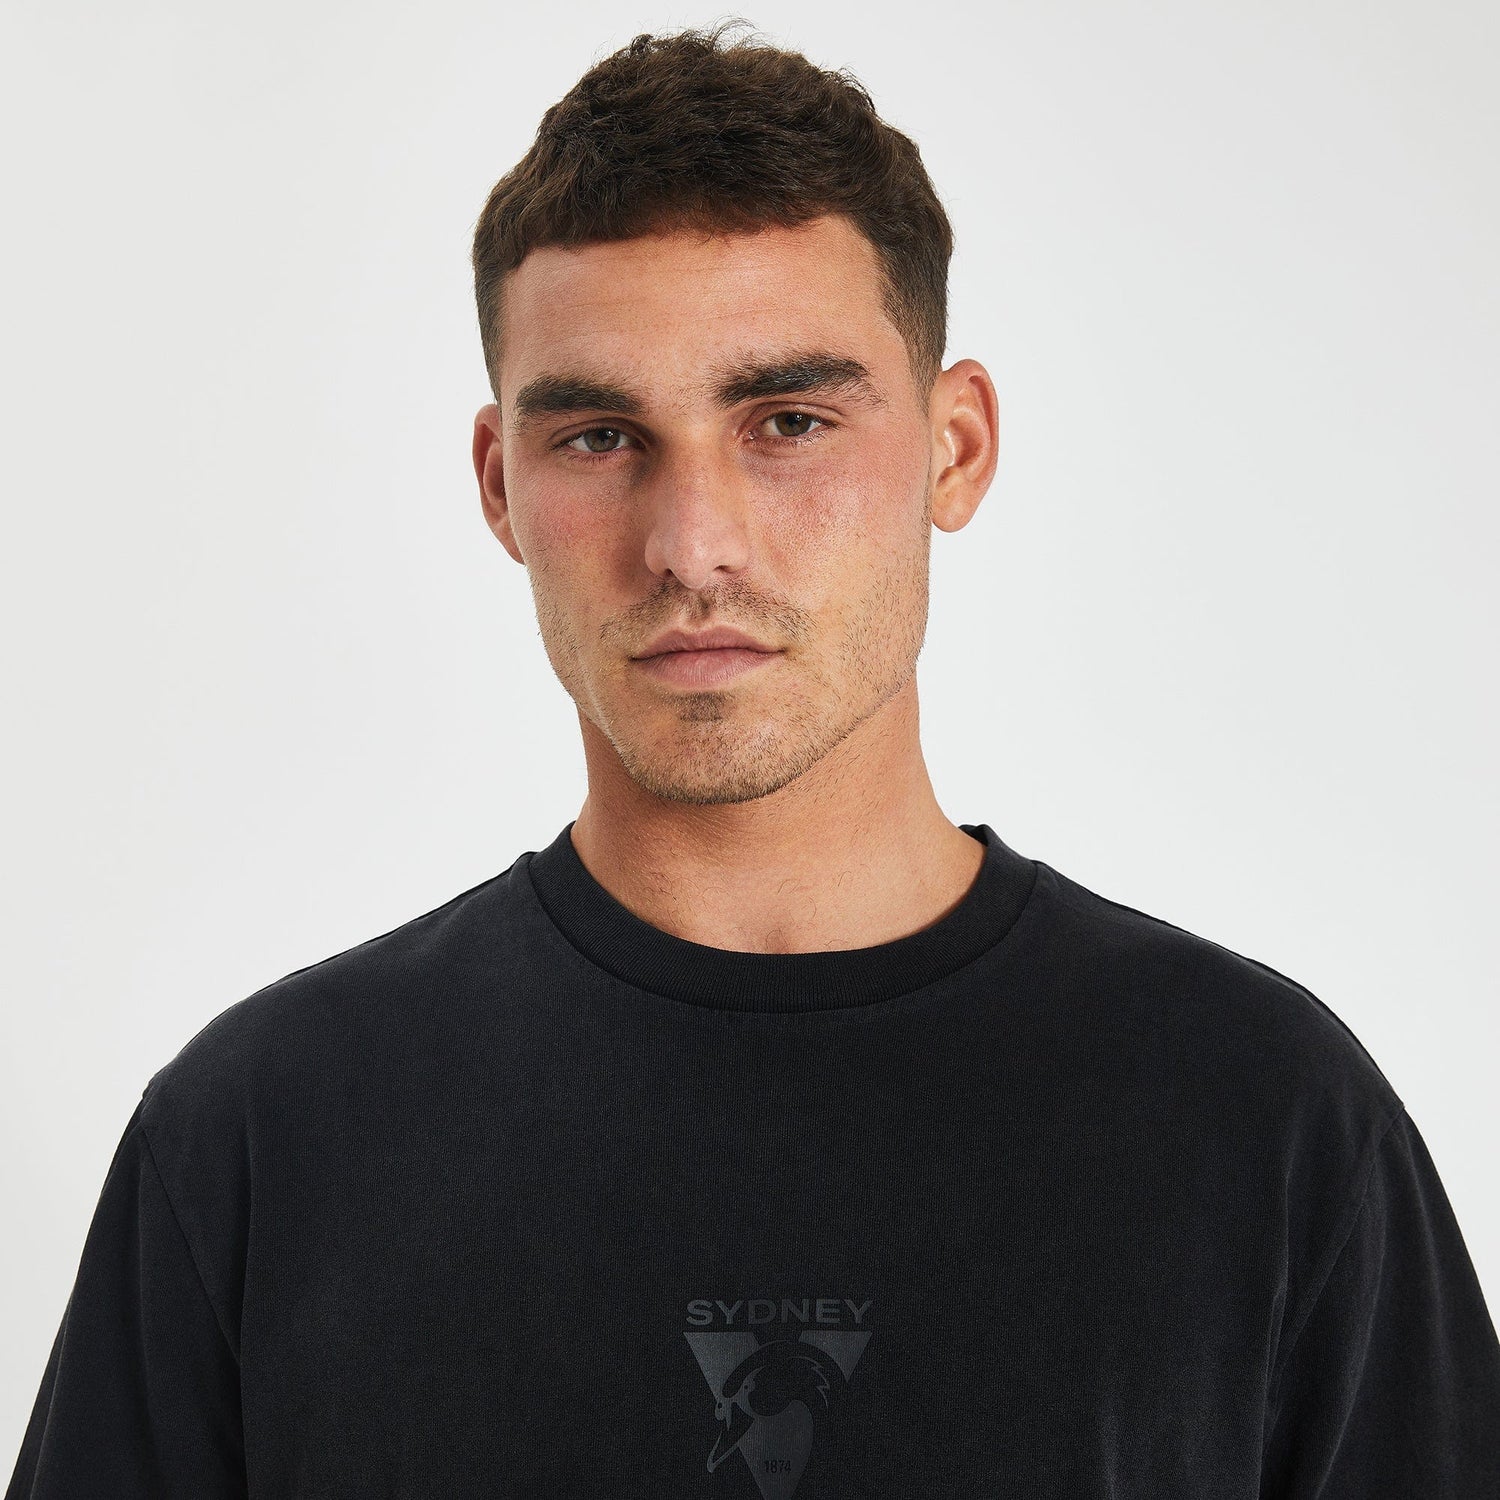 Sydney Swans Relaxed Fit T-Shirt Mineral Black